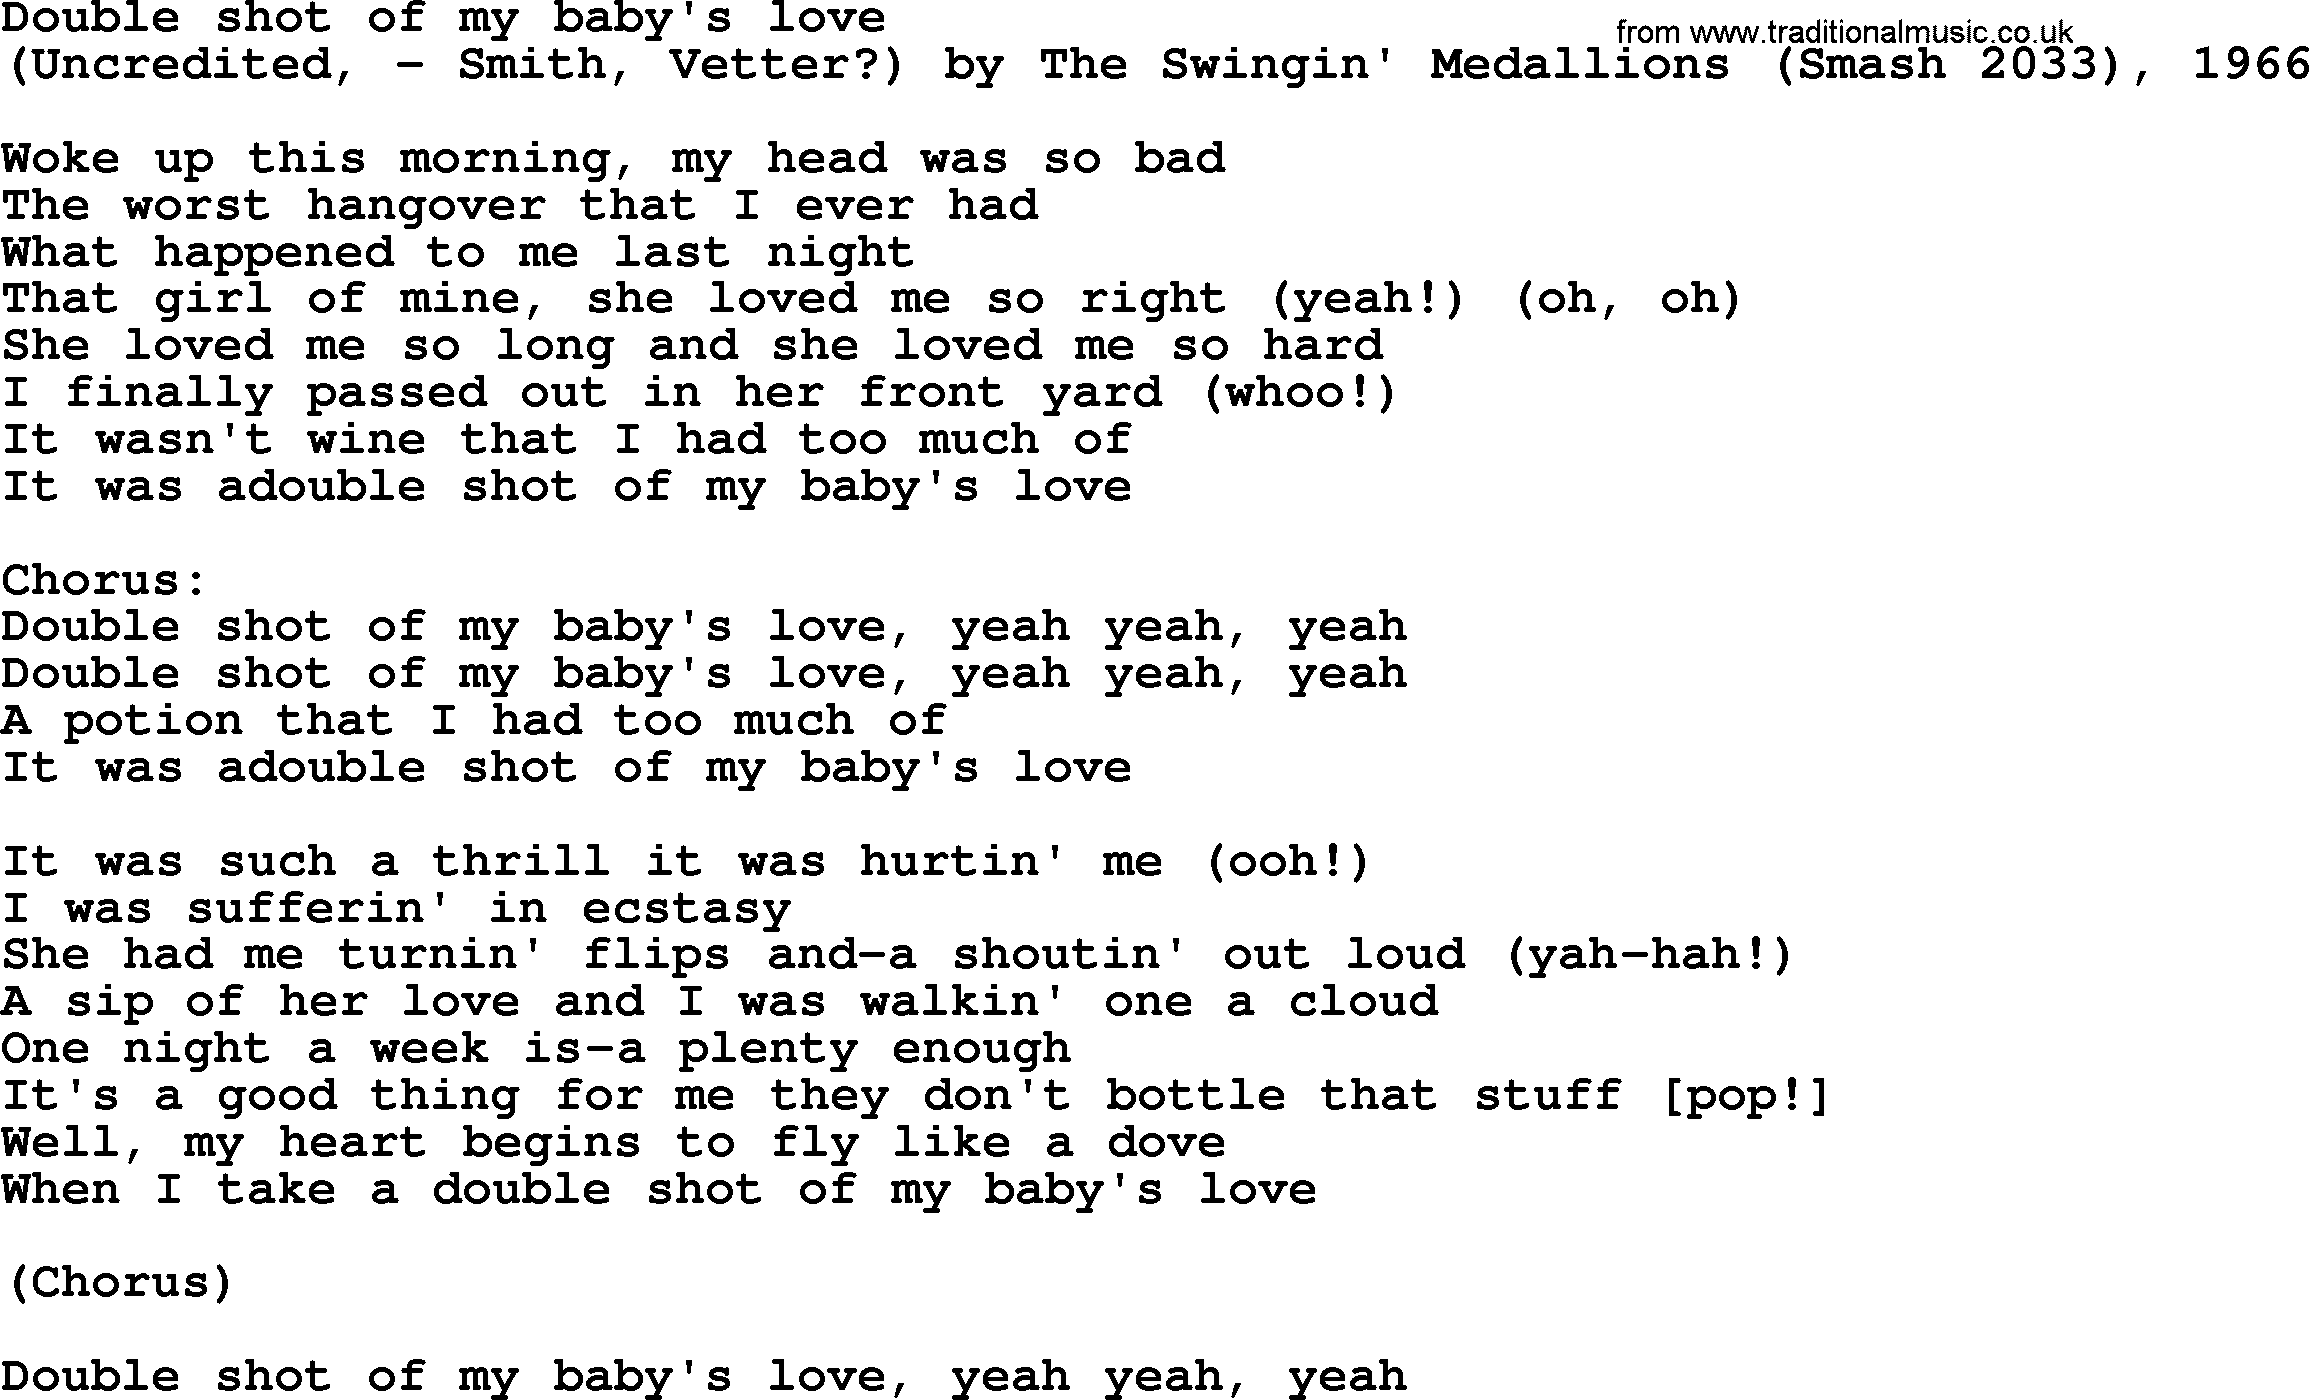 Bruce Springsteen song: Double Shot Of My Baby's Love lyrics